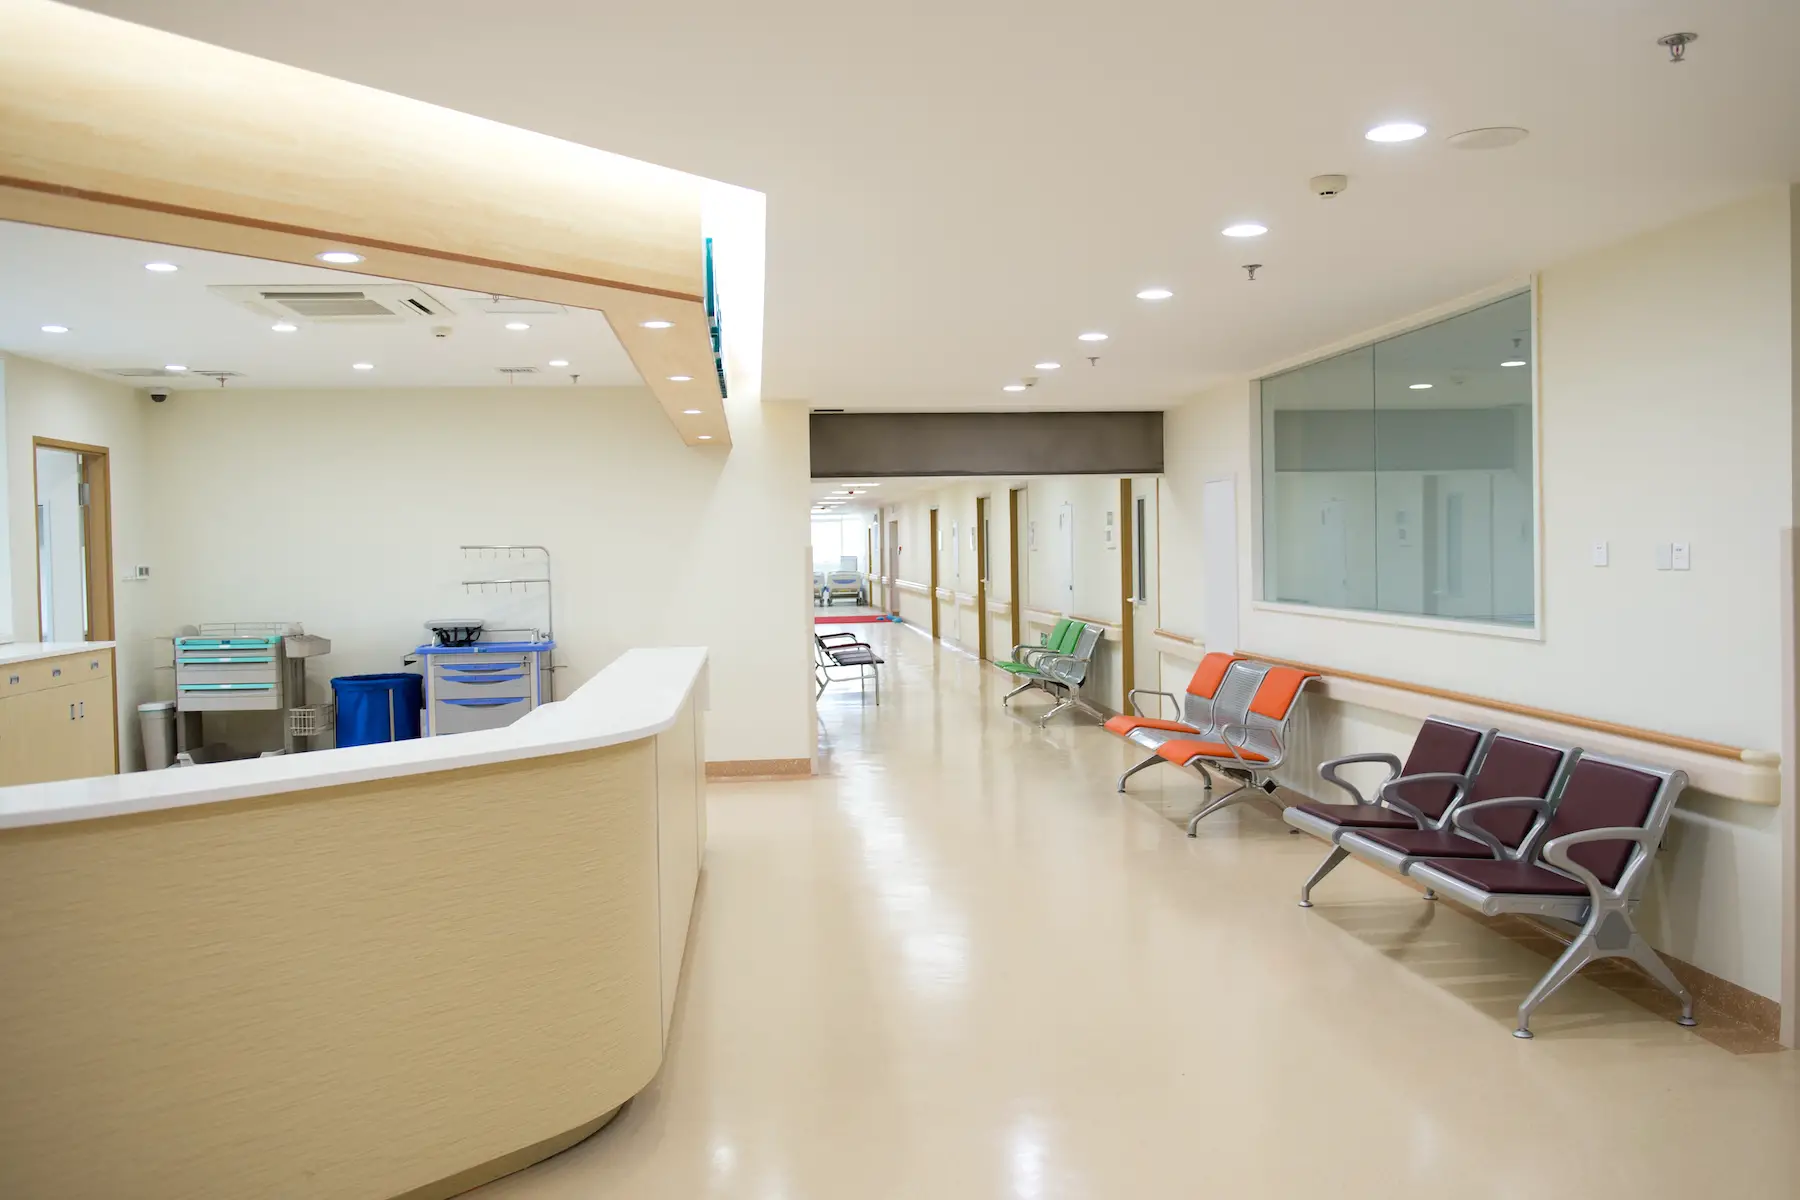 An empty hospital corridor, with chairs on one side and a nurses' station on the other